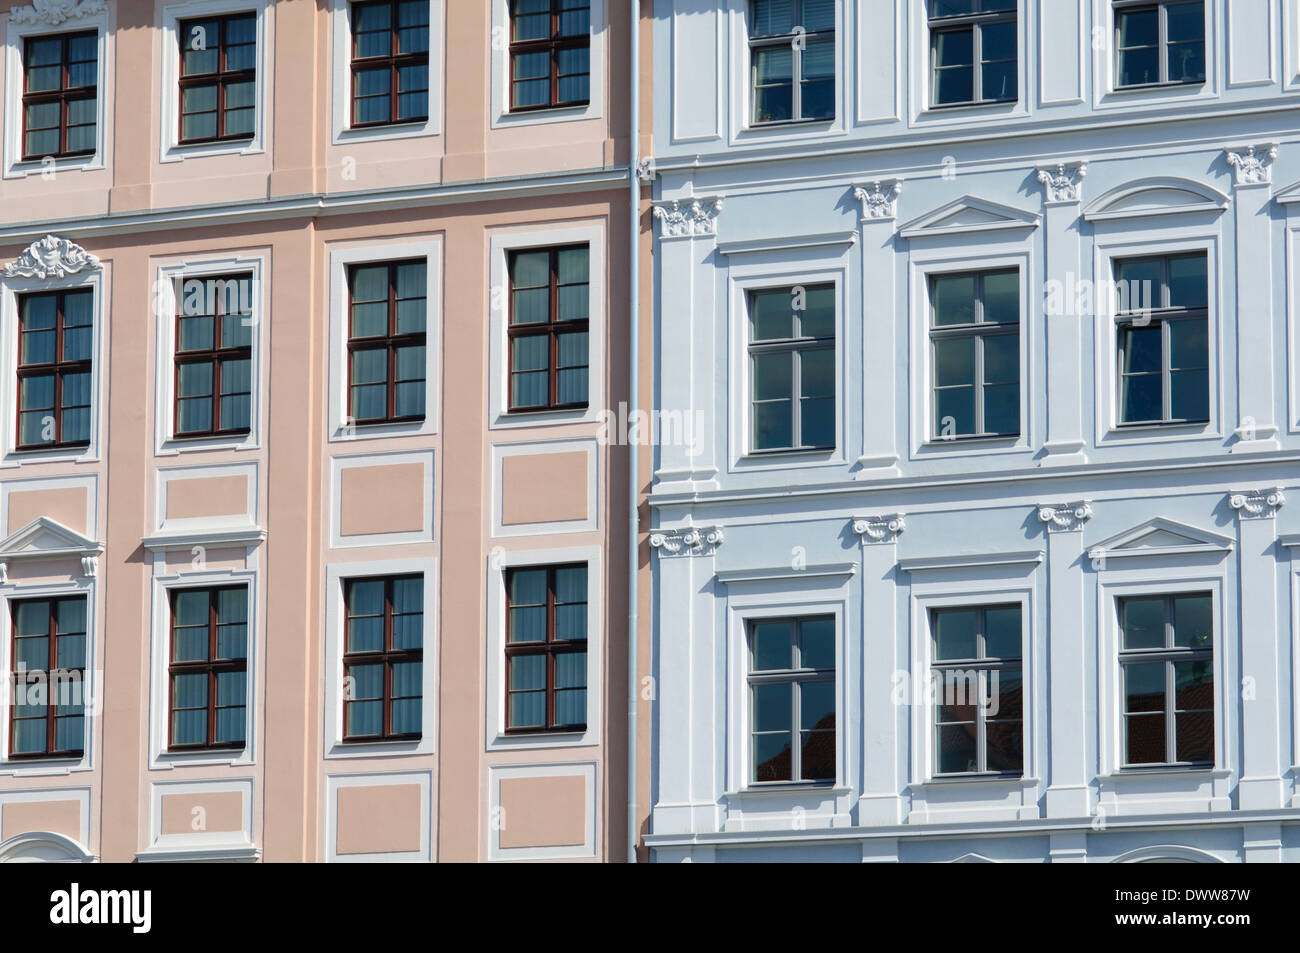 Germany, Saxony, Dresden, Neumarkt Square, Architectural Details Stock Photo